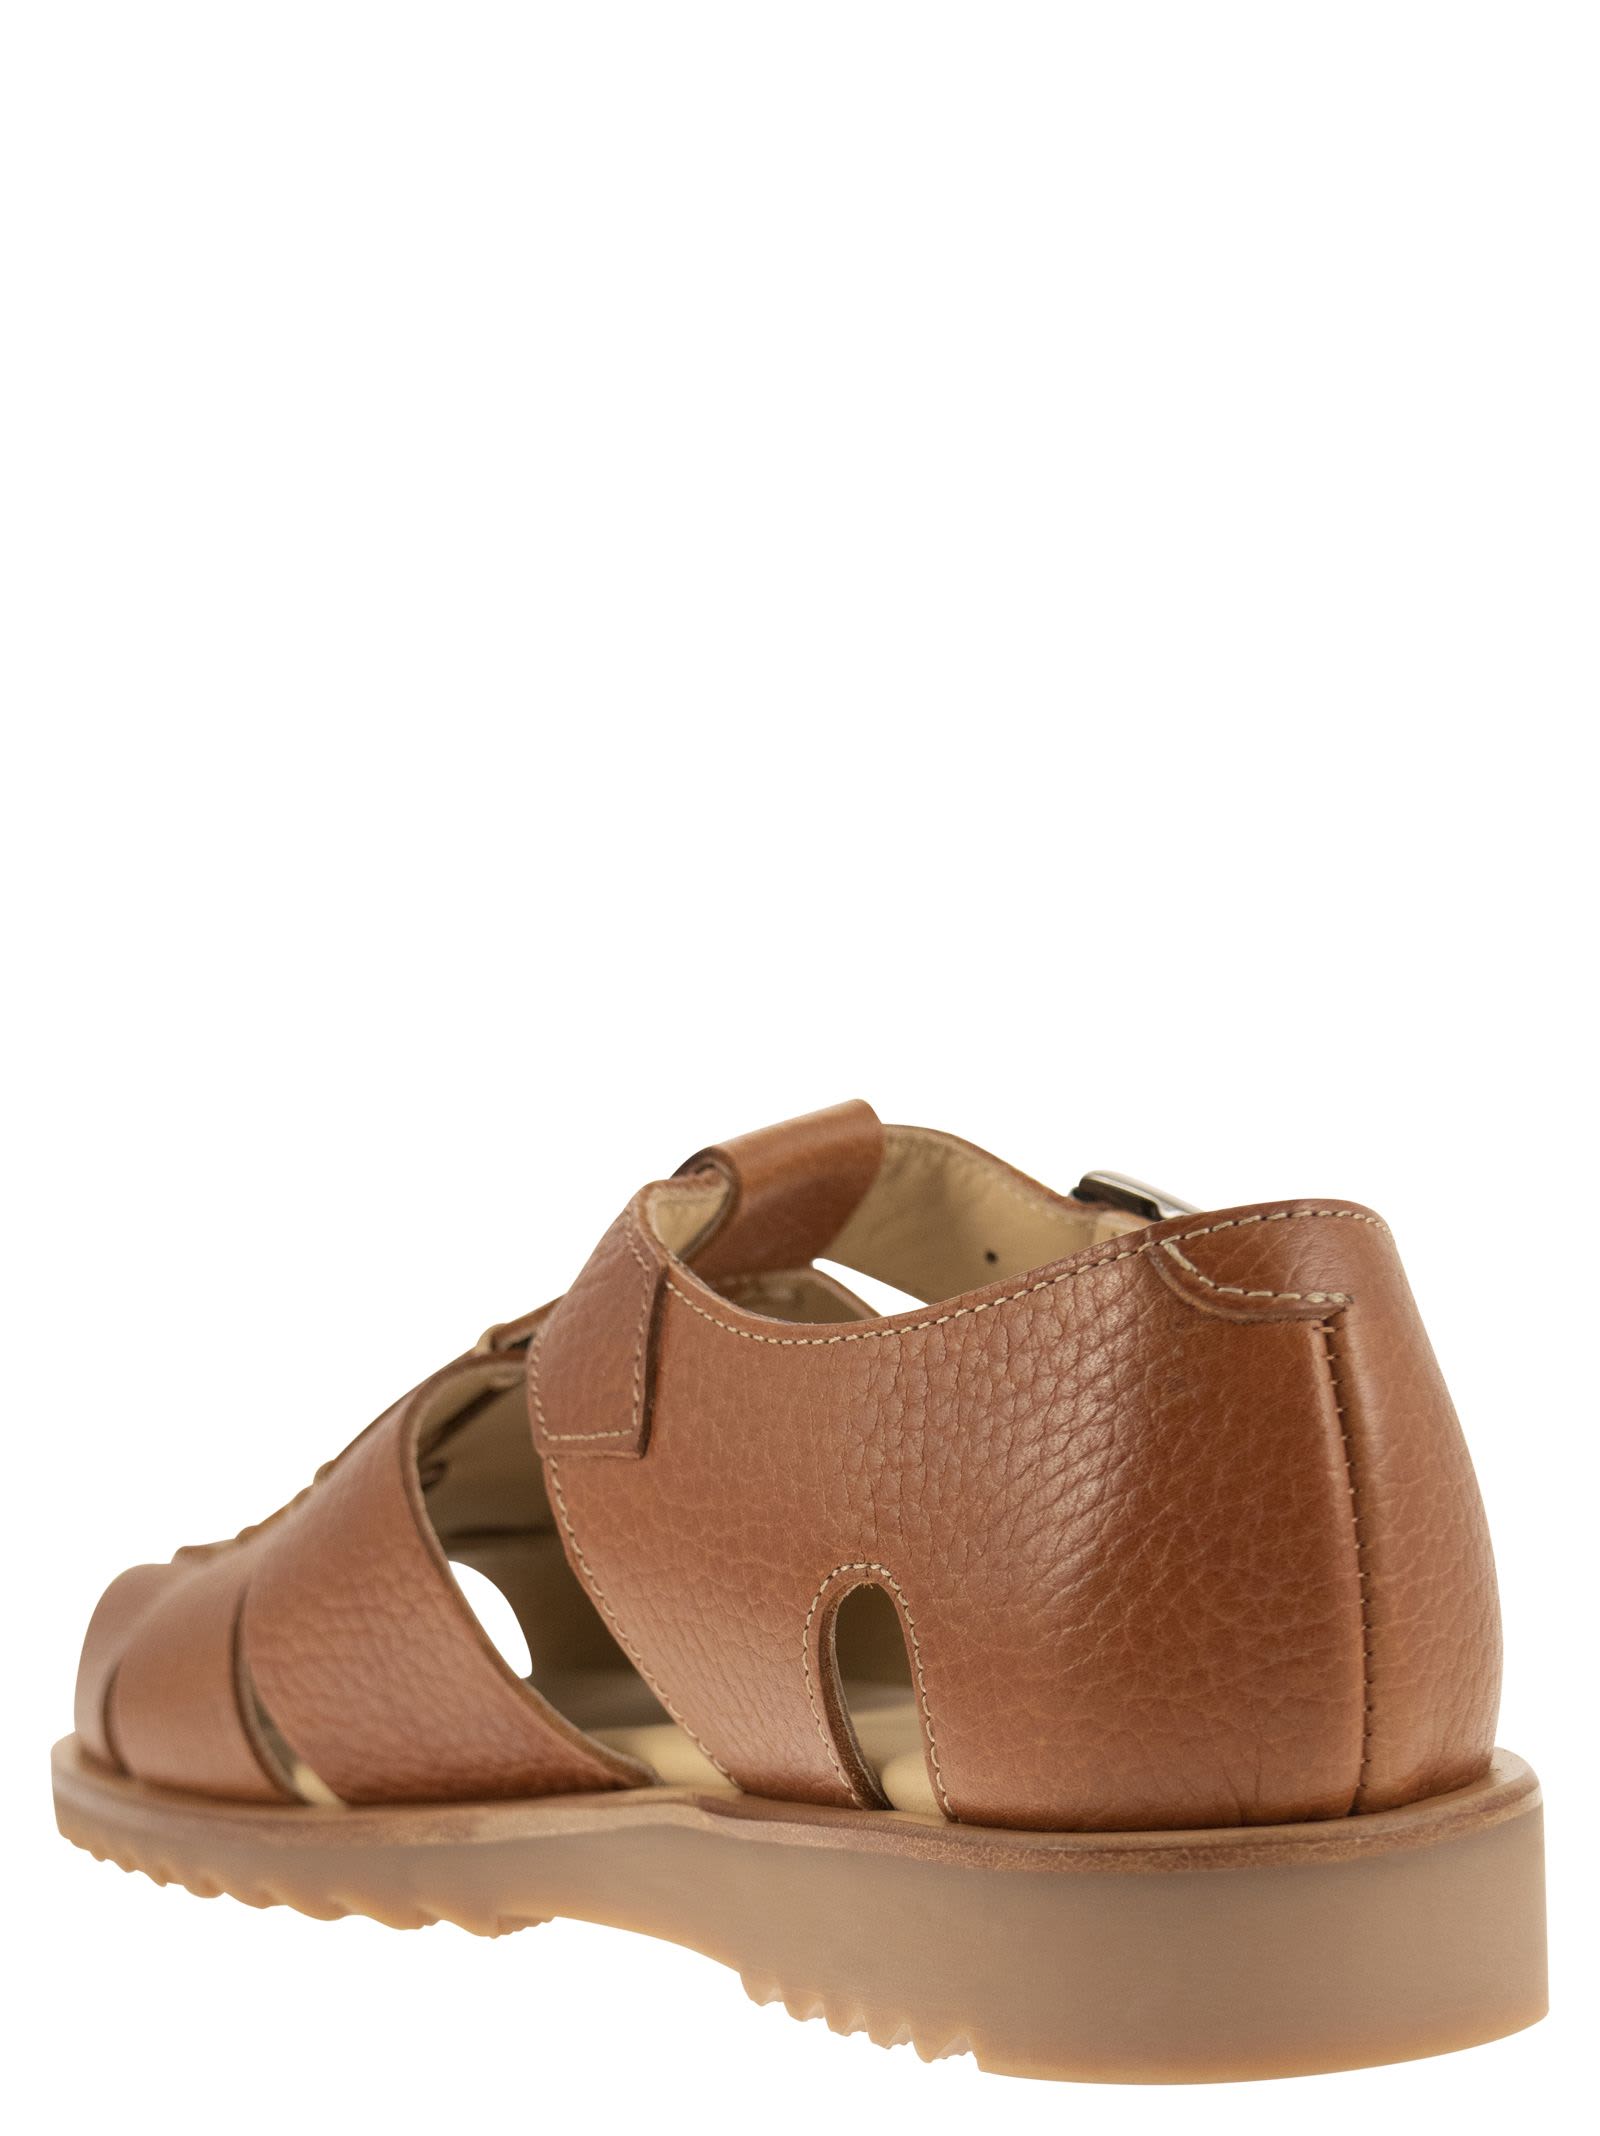 Pacific Sport Sandals In Brown